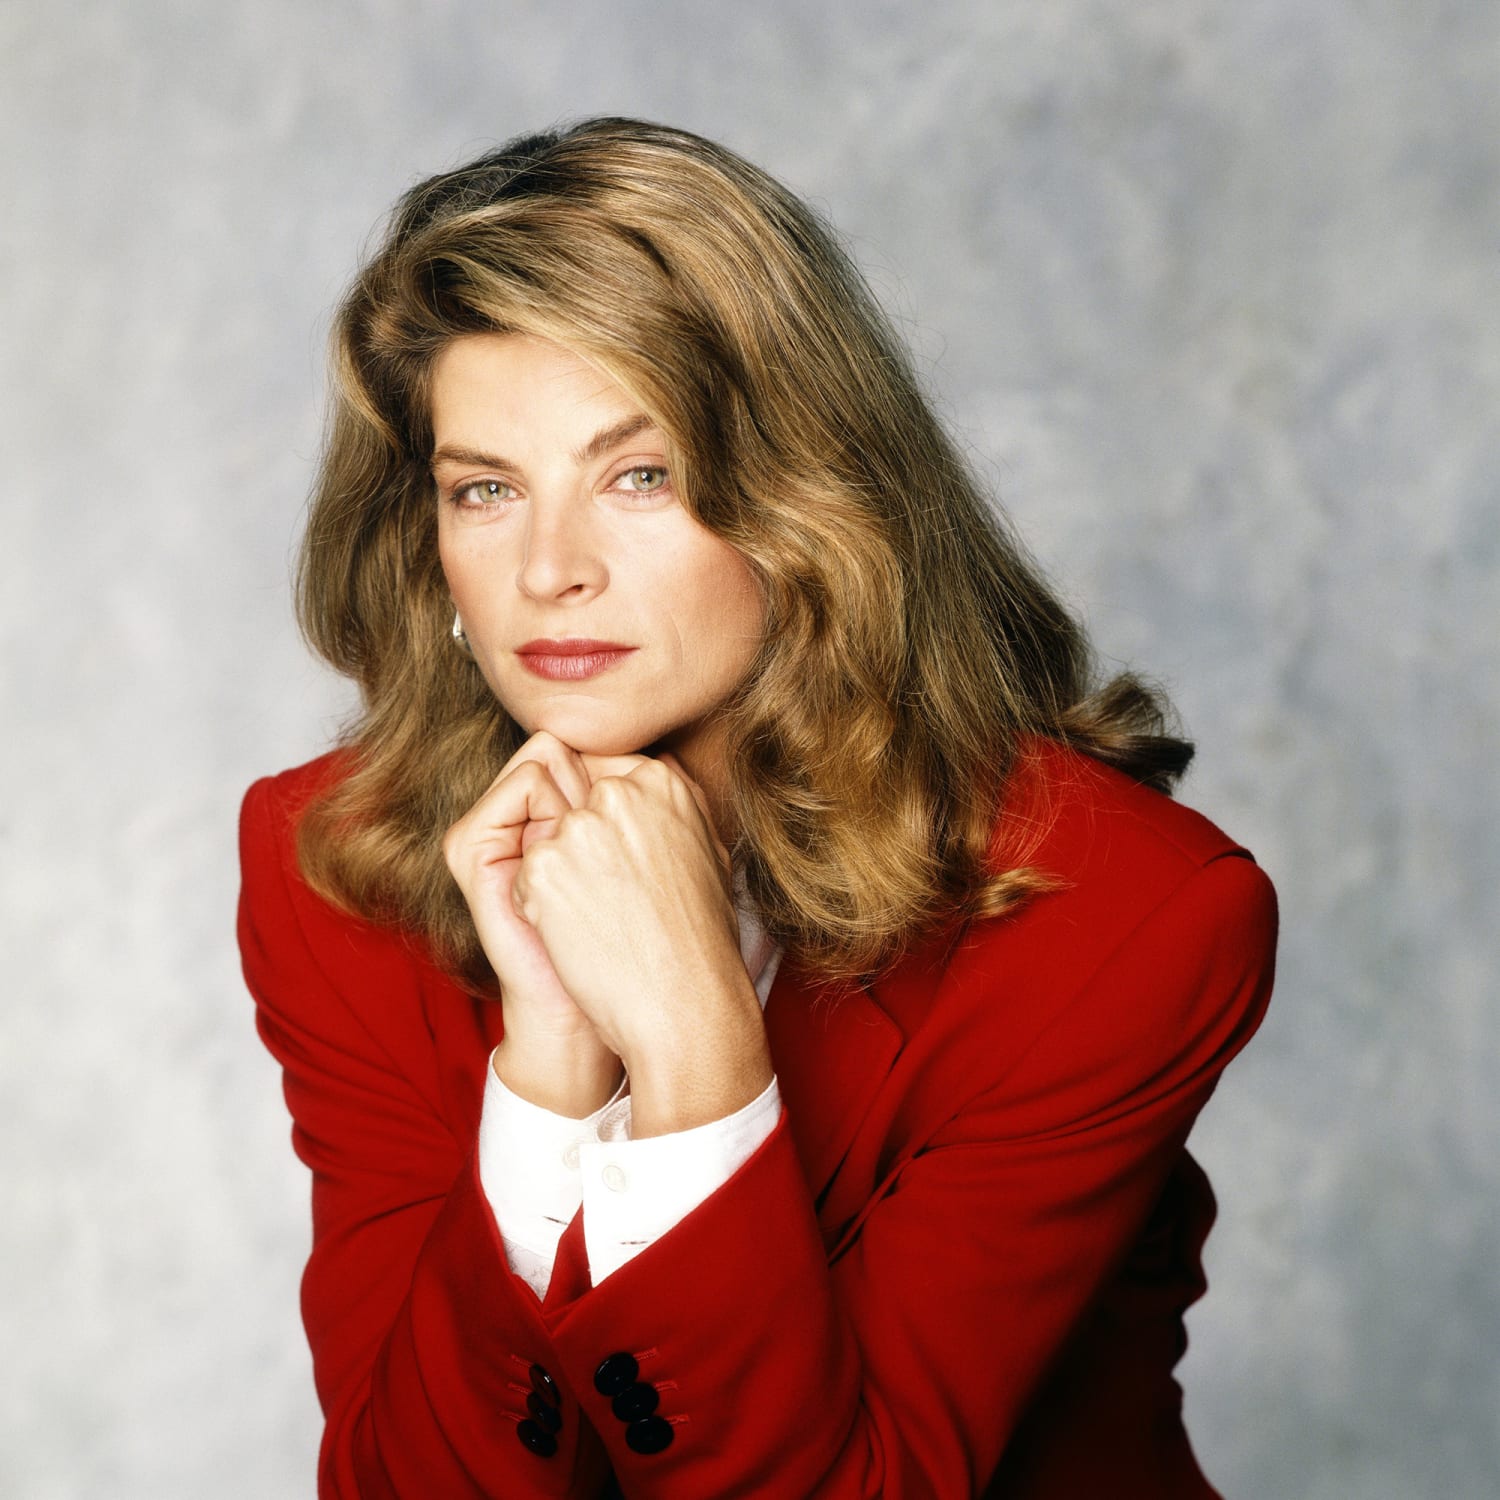 Fans remember favorite Kirstie Alley roles, from 'Cheers' to 'Look Who's Talking'